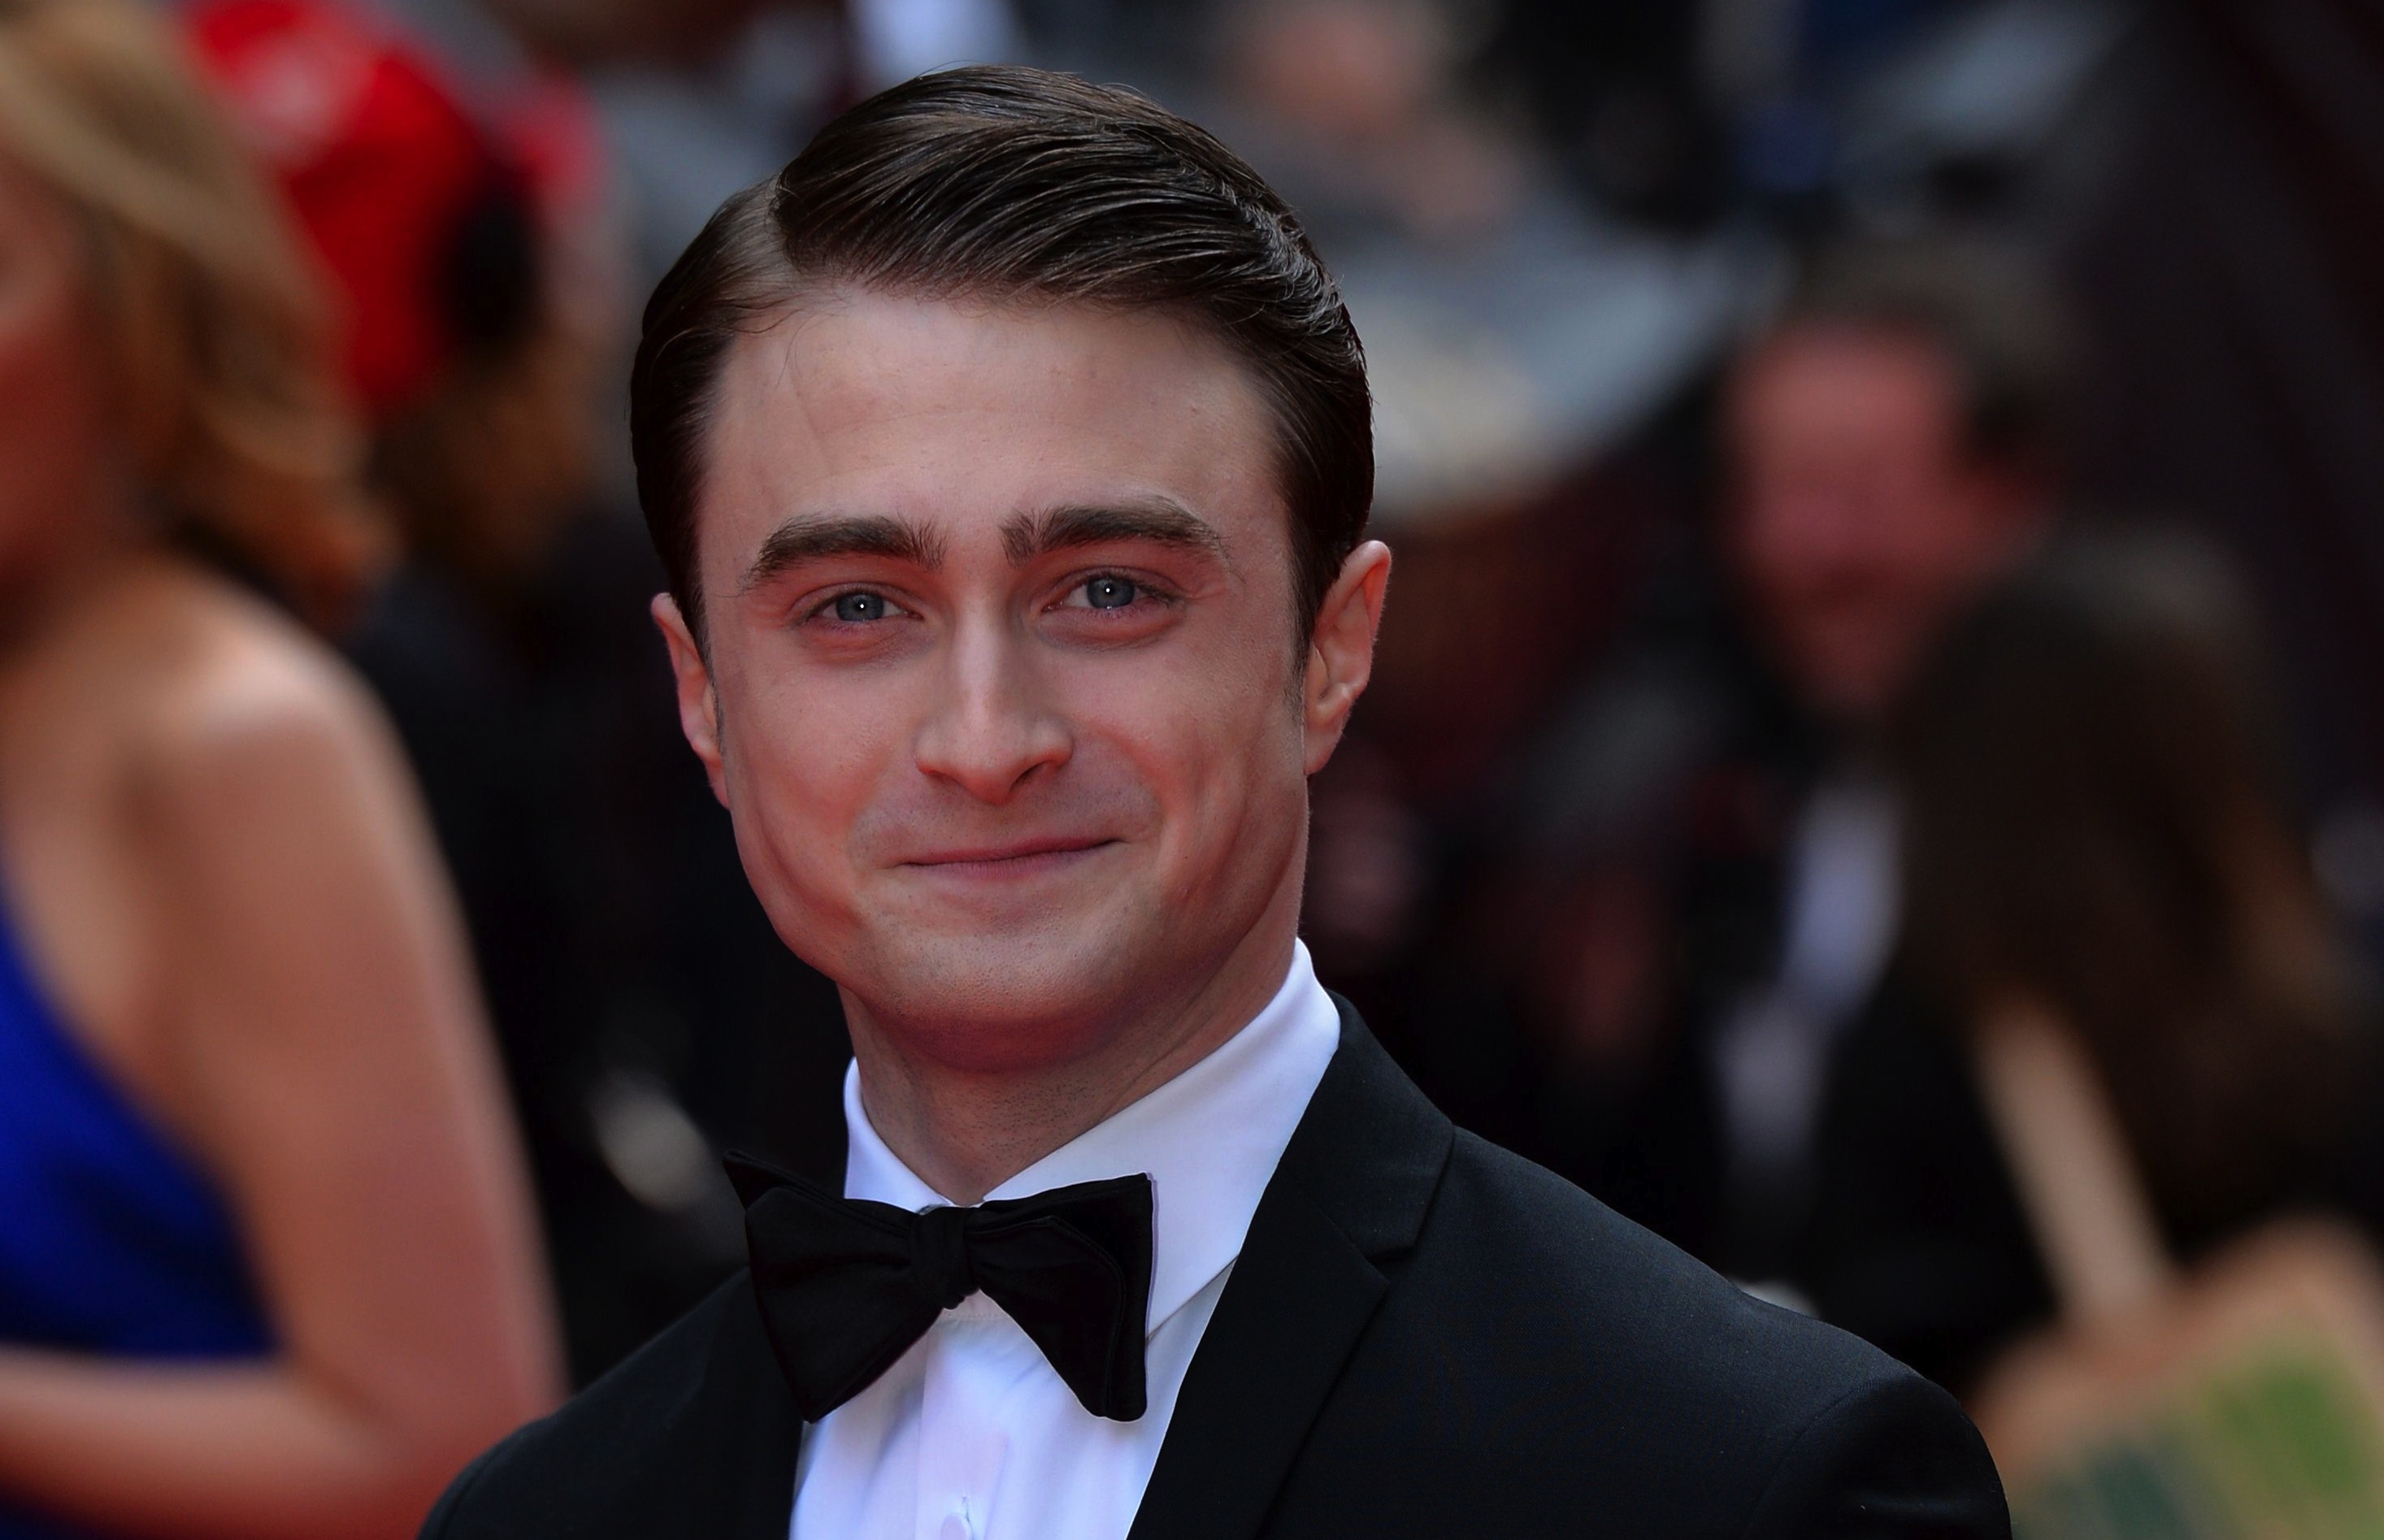 Actor Daniel Radcliffe poses on the red carpet last month at the Lawrence Olivier Awards in London. | AFP-JIJI